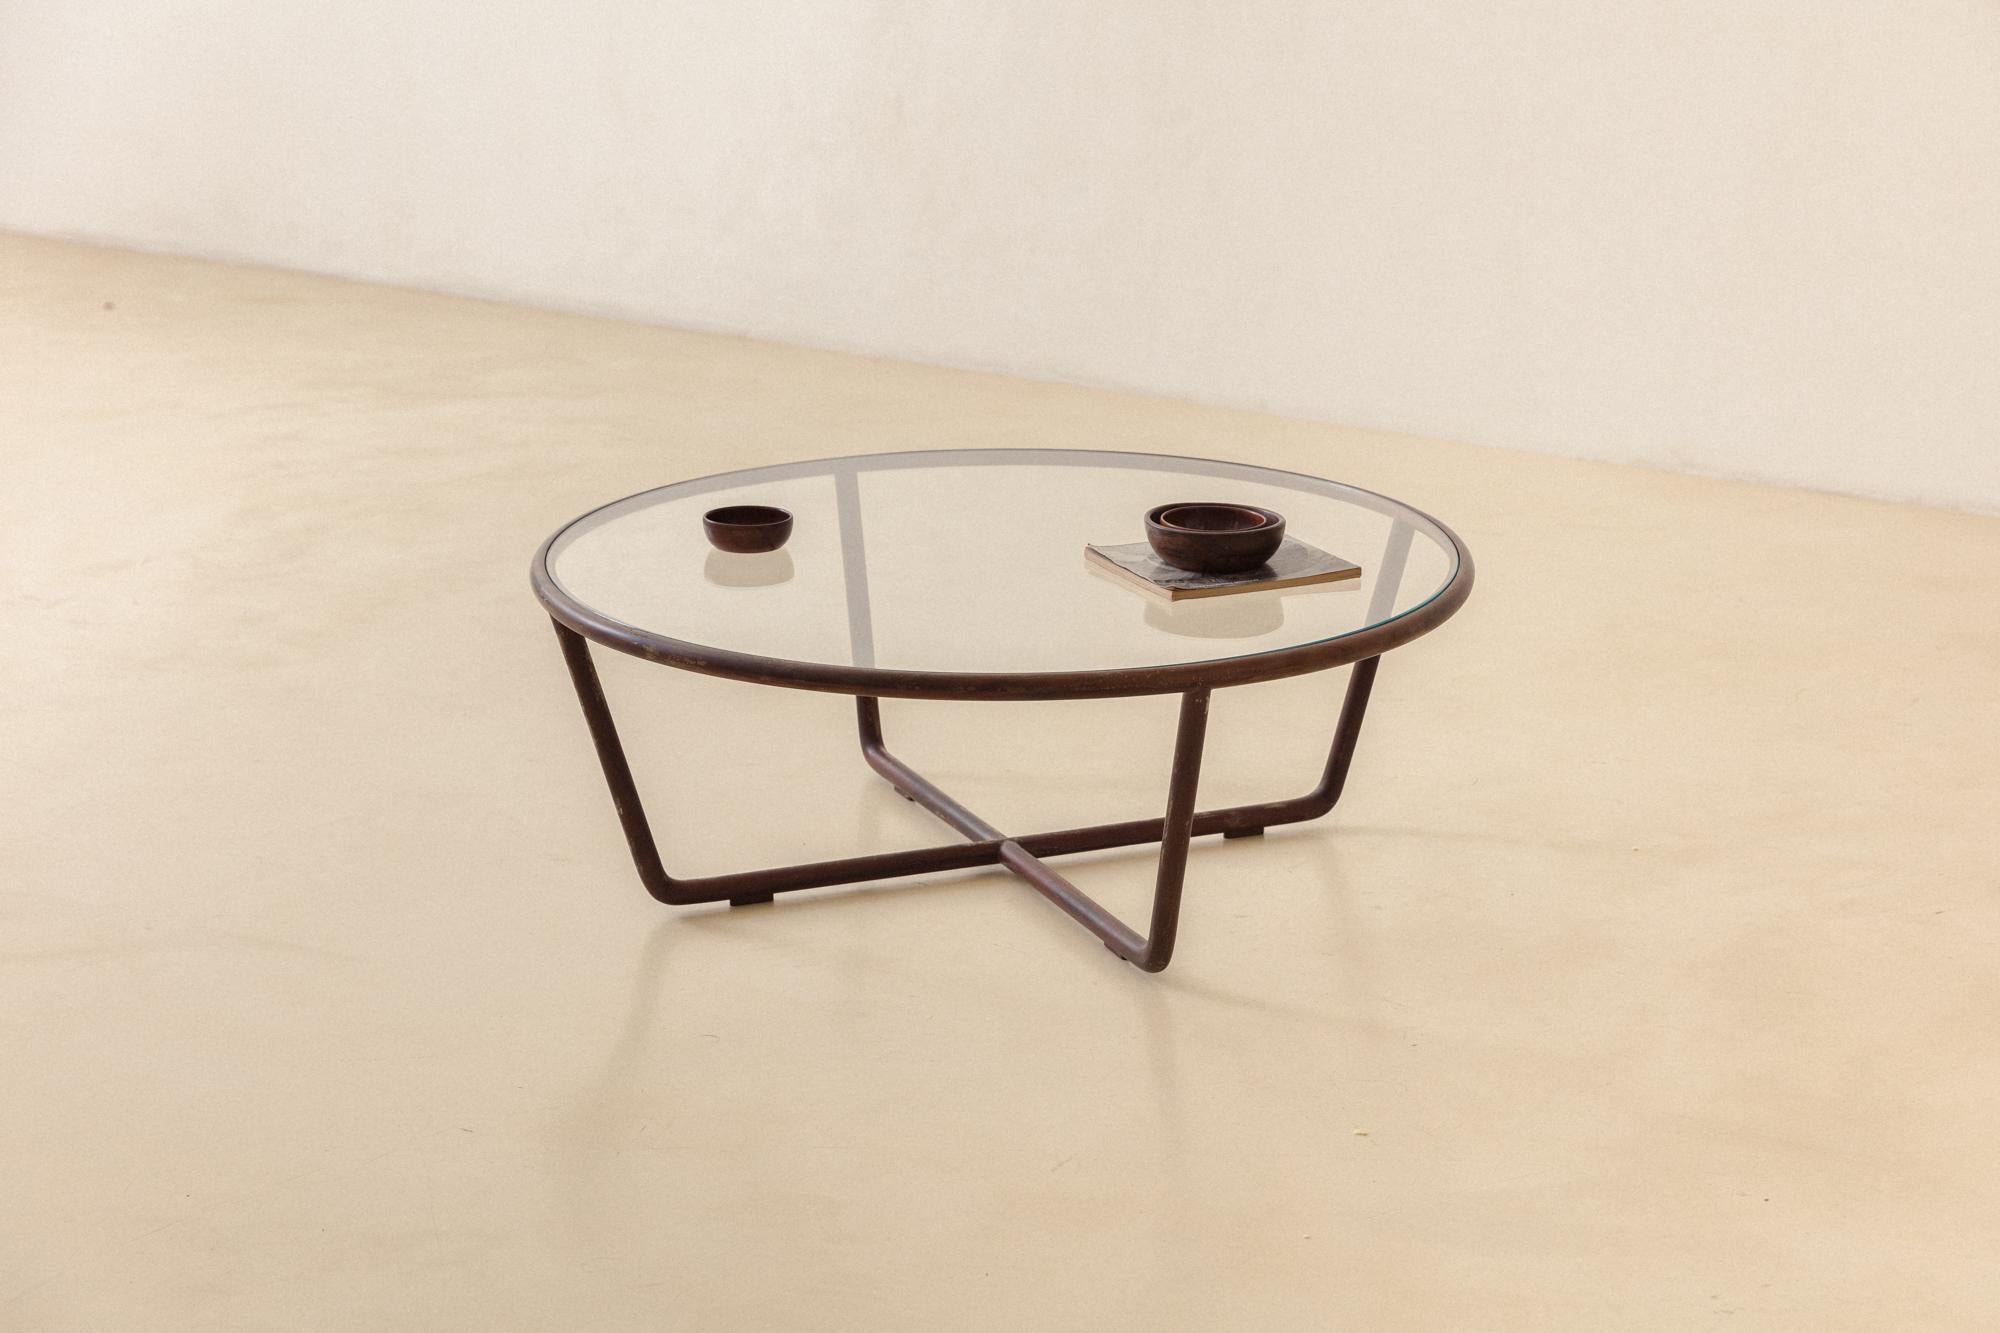 Joaquim Tenreiro (1906-1992) designed this round coffee table in 1947 – the same period he created other Estrutural pieces, like the famous dining chairs and dining table.

As with other furniture pieces designed by Tenreiro, this light coffee